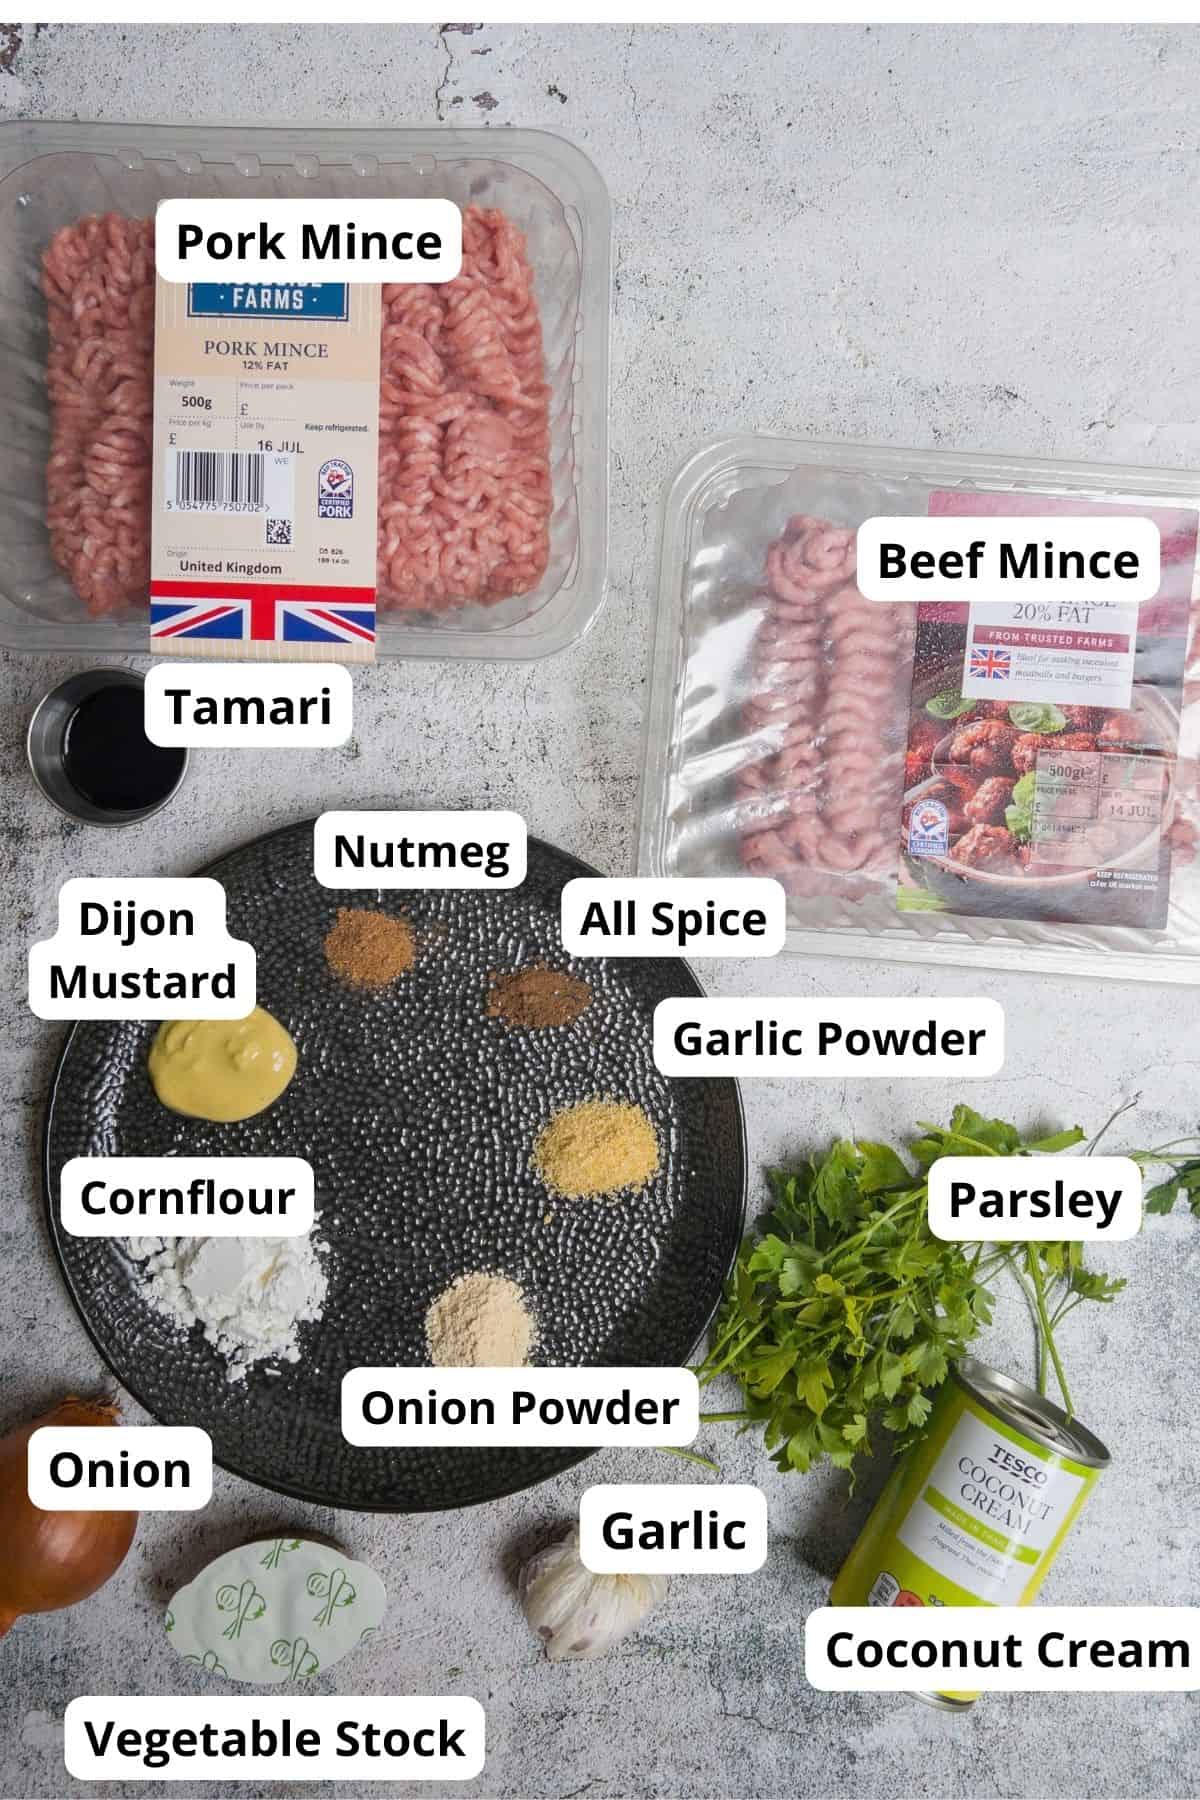 Ingredients laid out for gluten free Swedish meatballs